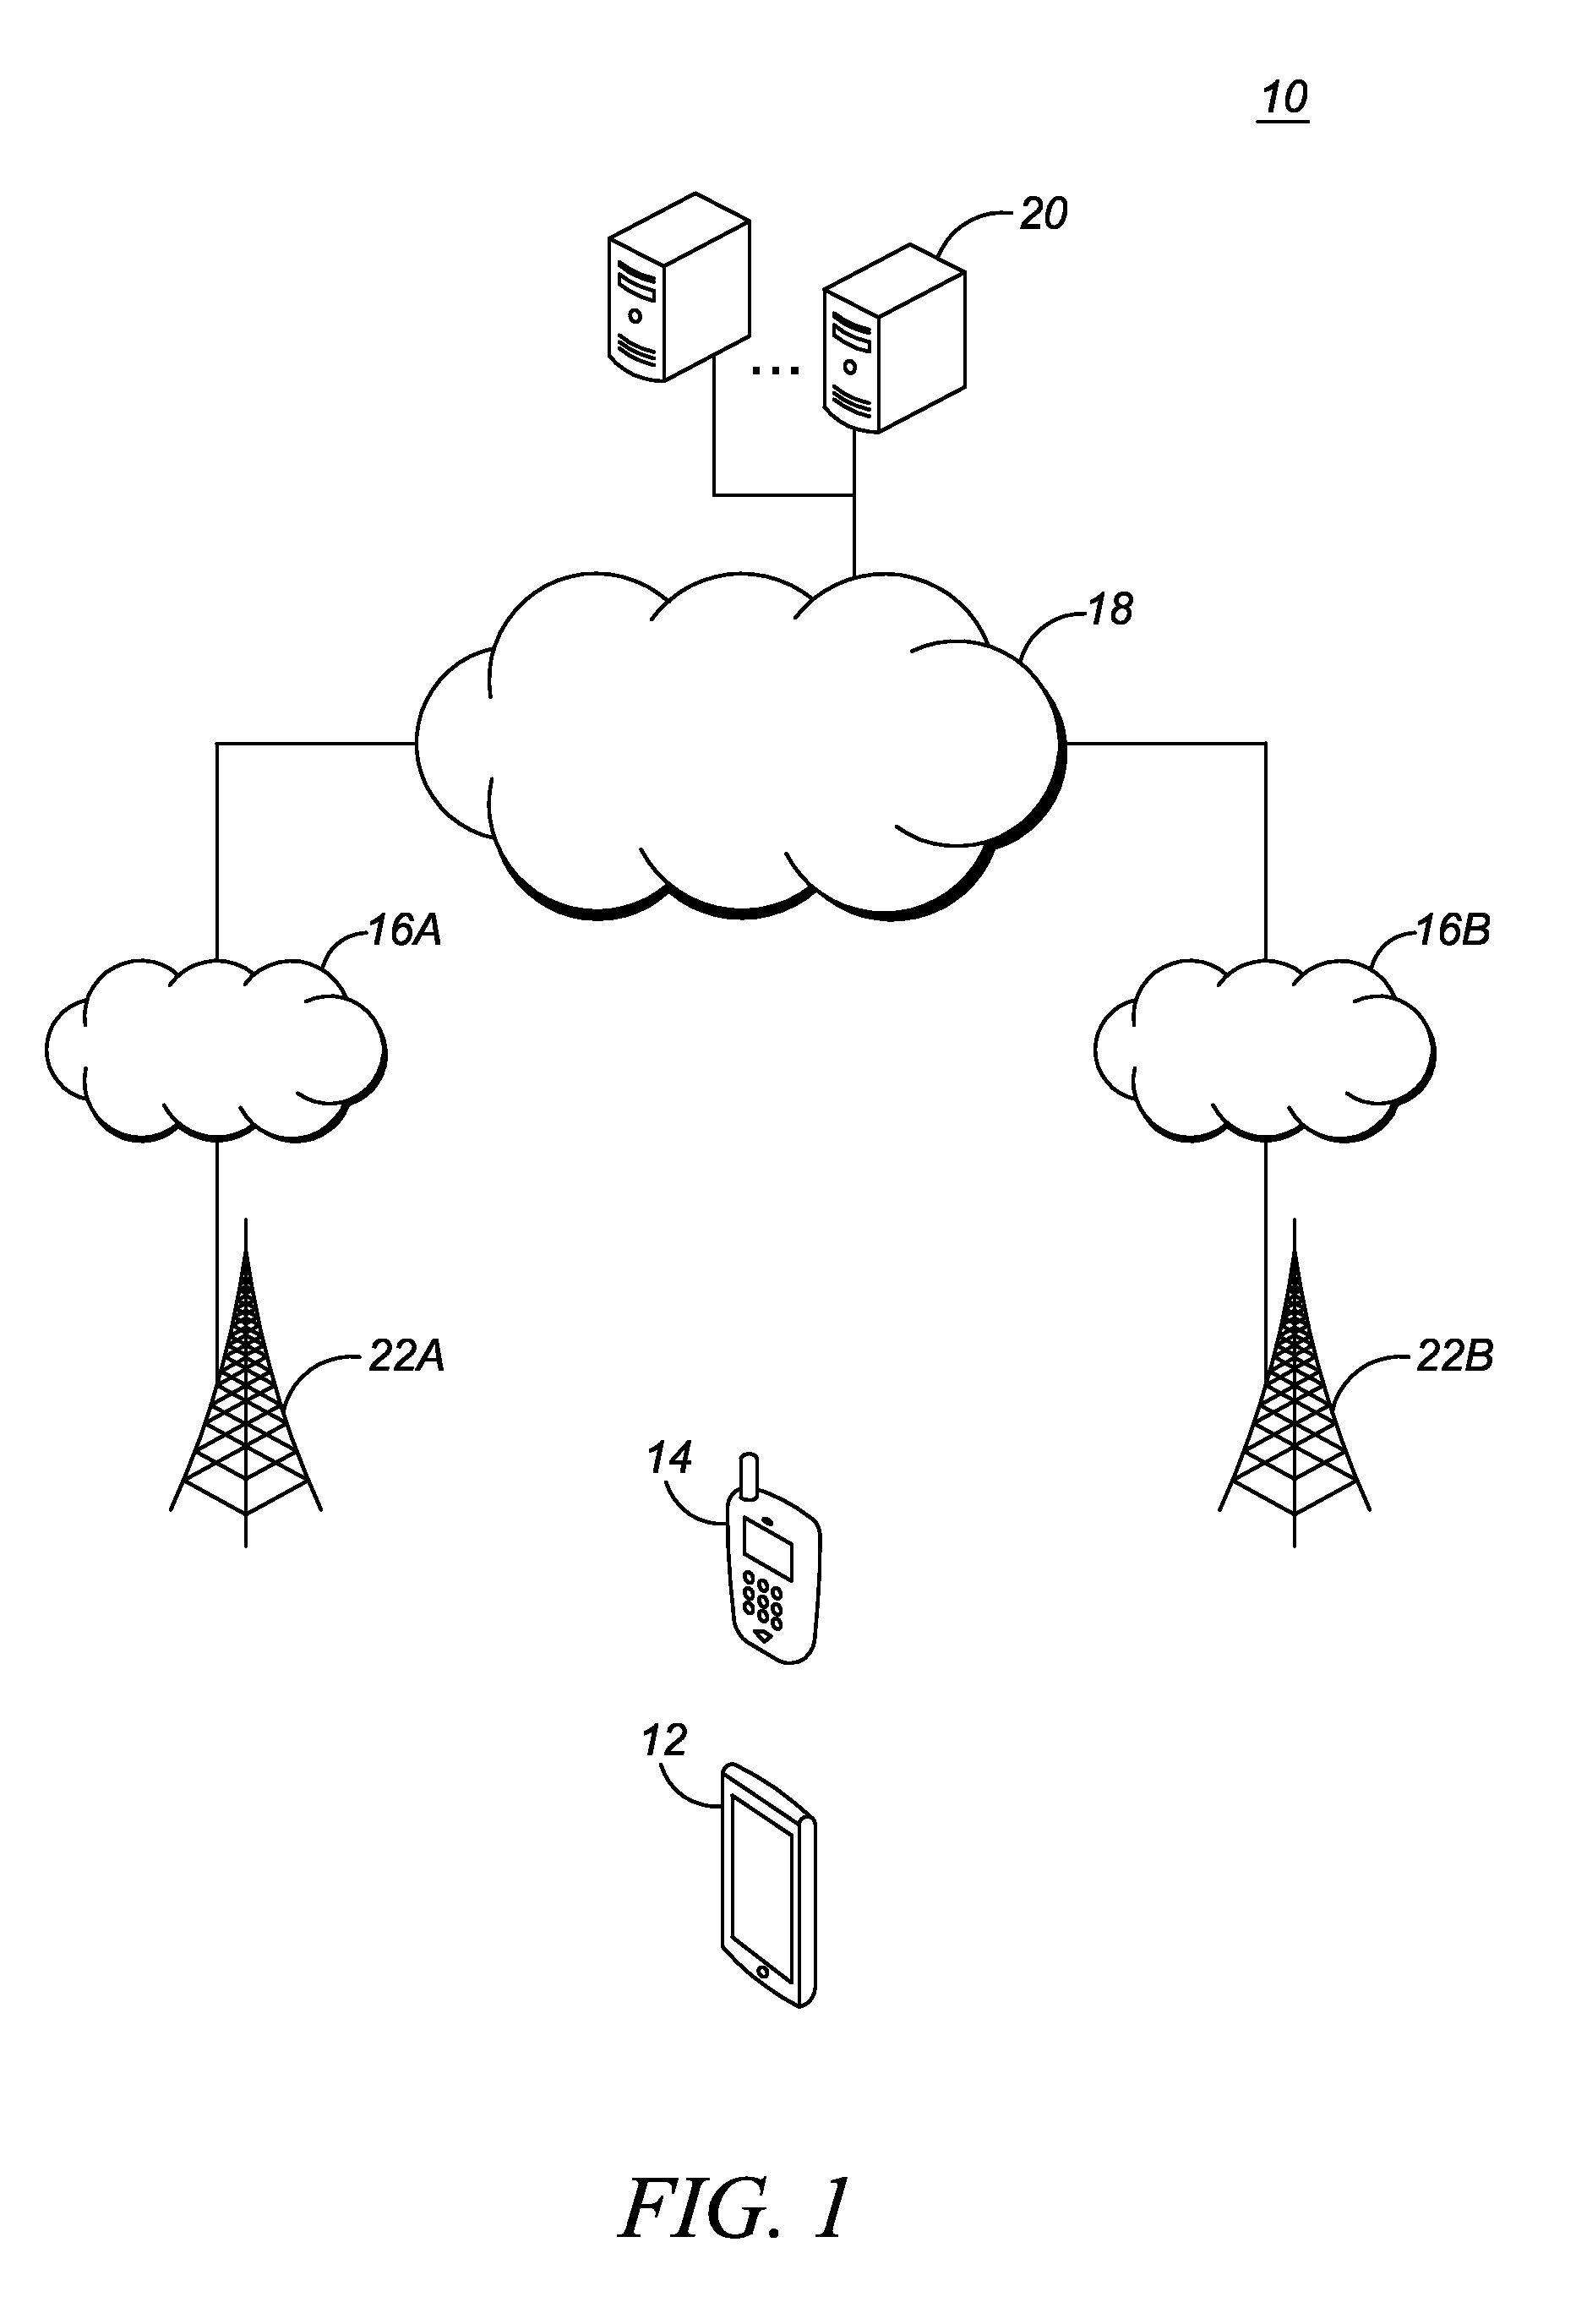 Systems and methods for correlating routes of mobile devices